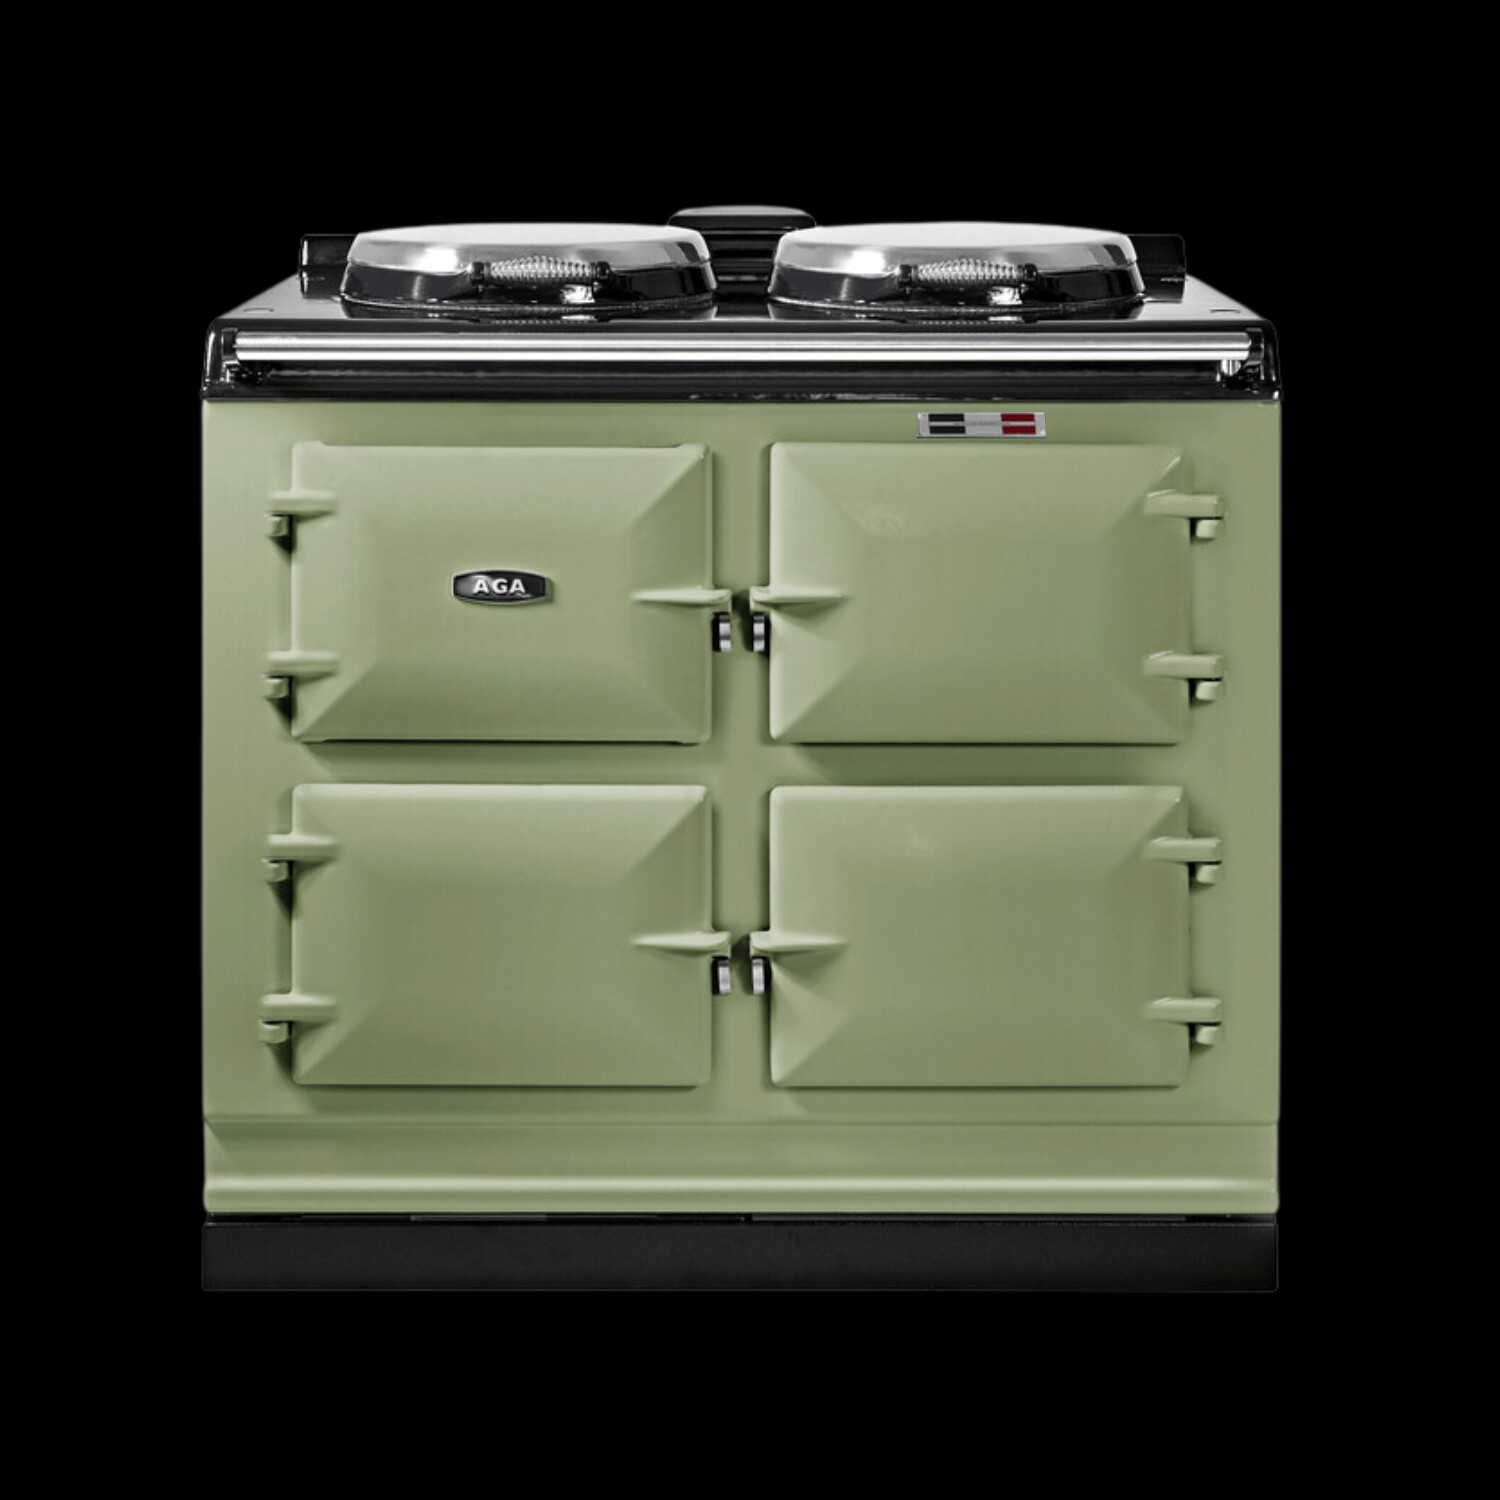 Reconditioned 3 Oven eControl Aga Cooker (Any Colour)